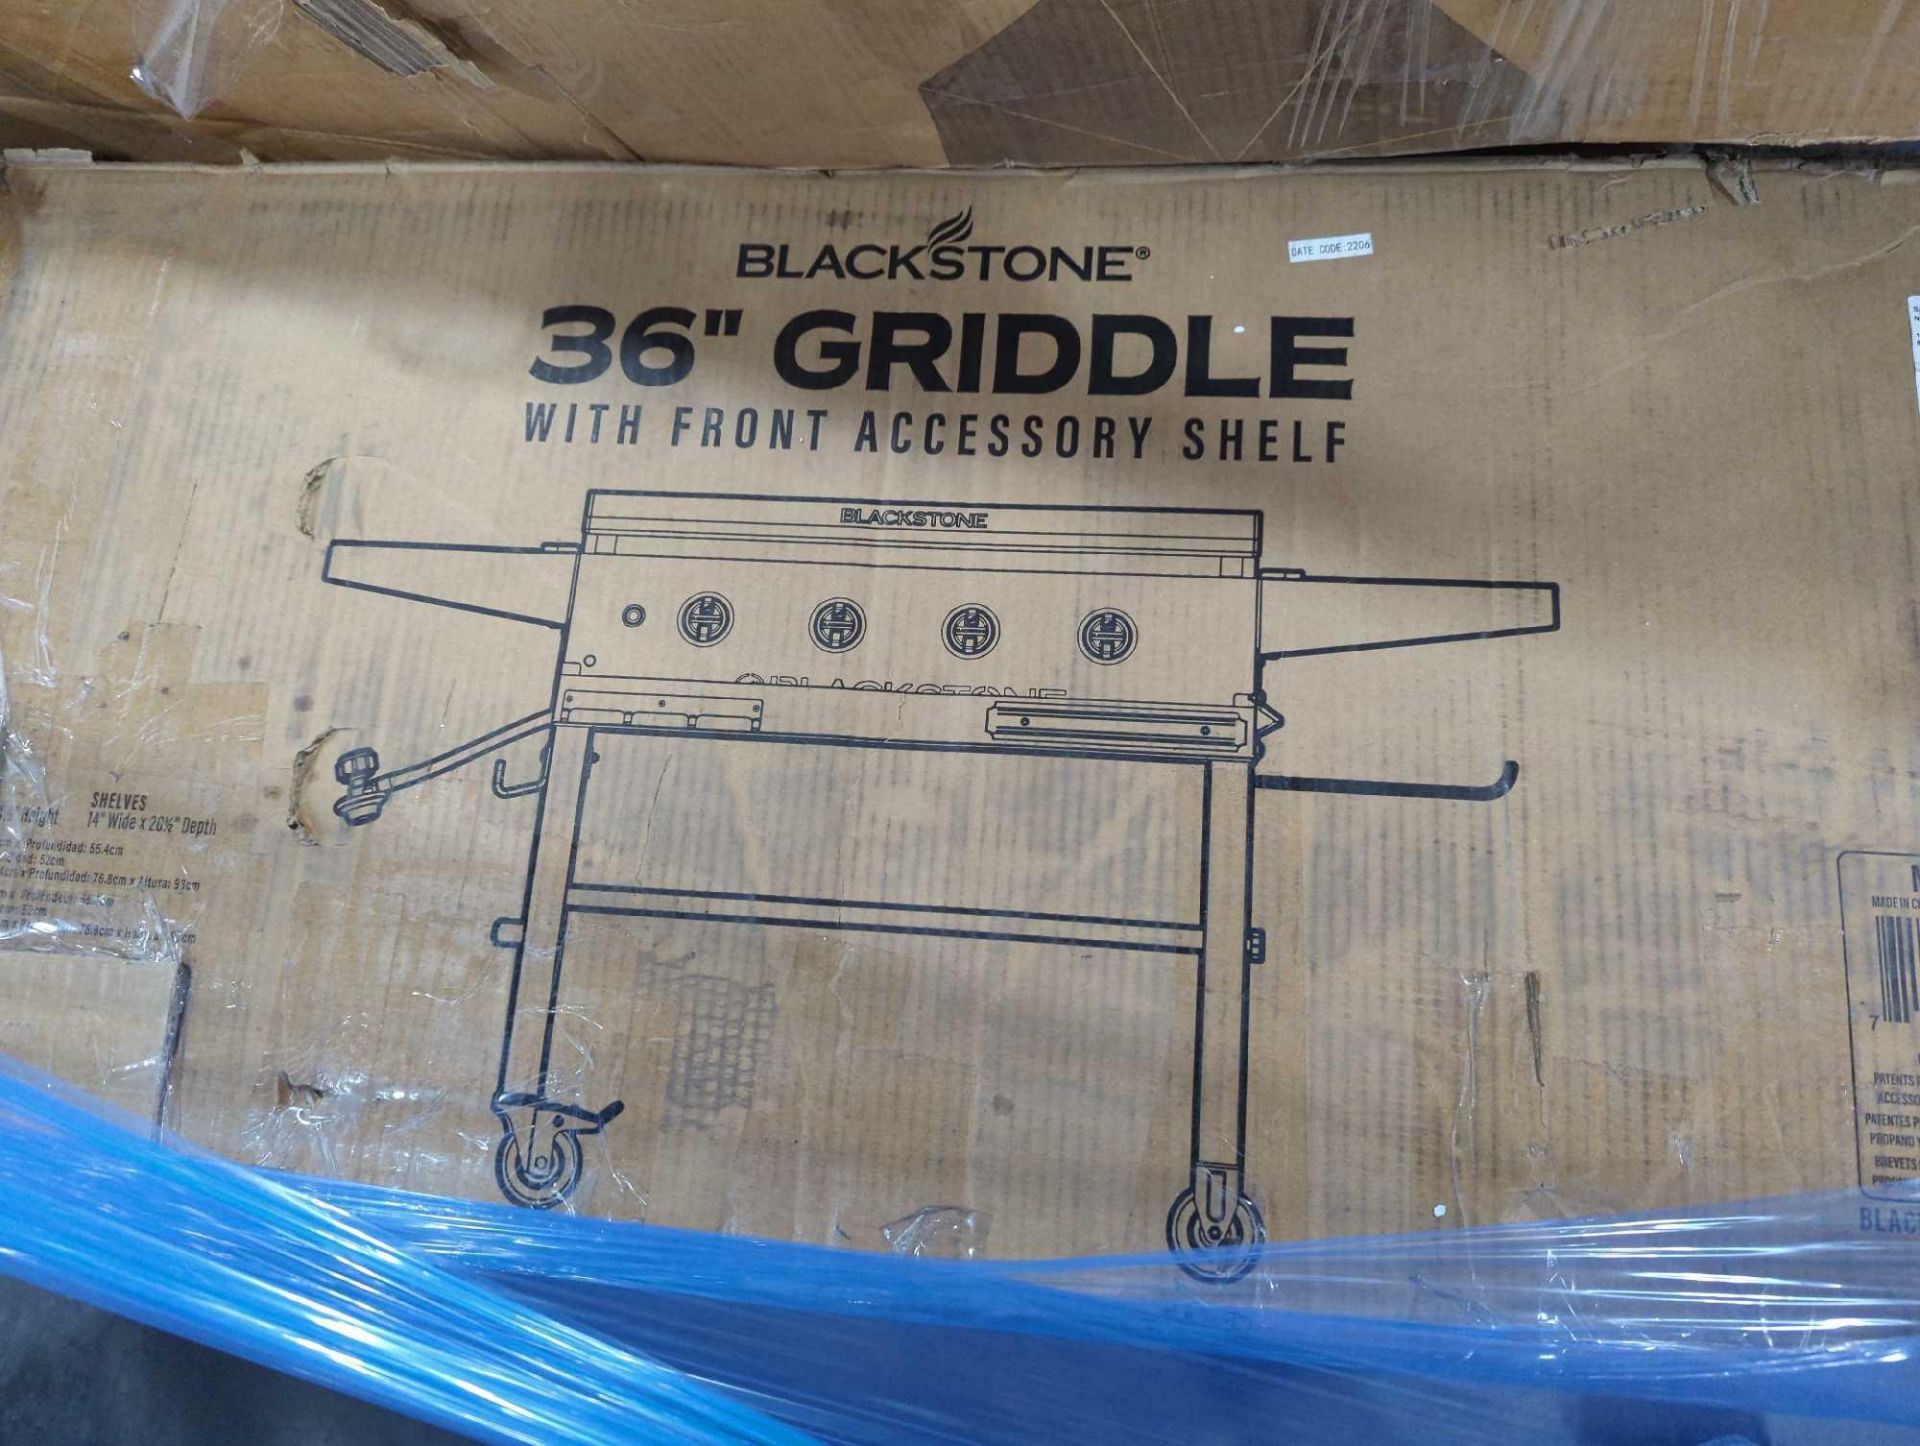 (Amazon Returns) Blackstone Griddle, and more - Image 2 of 4